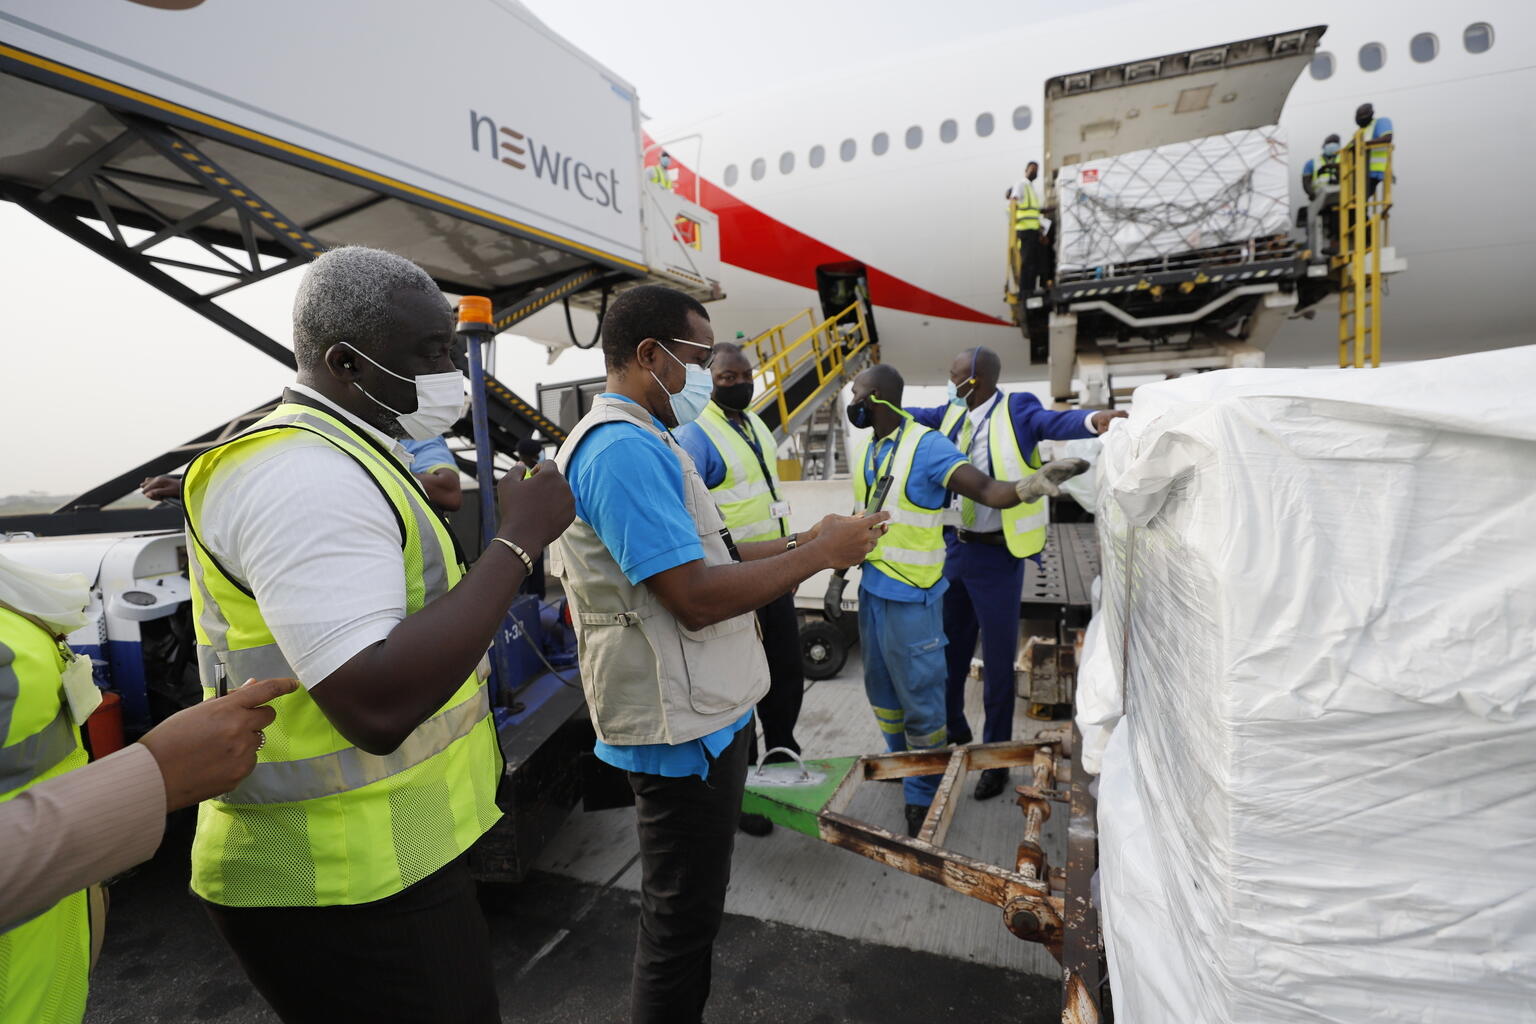 On 24 February 2021, staff unloads the first shipment of COVID-19 vaccines distributed by the COVAX Facility at the Kotoka International Airport in Accra, Ghana's capital.

CREDIT: Francis Kokoroko/COVAX